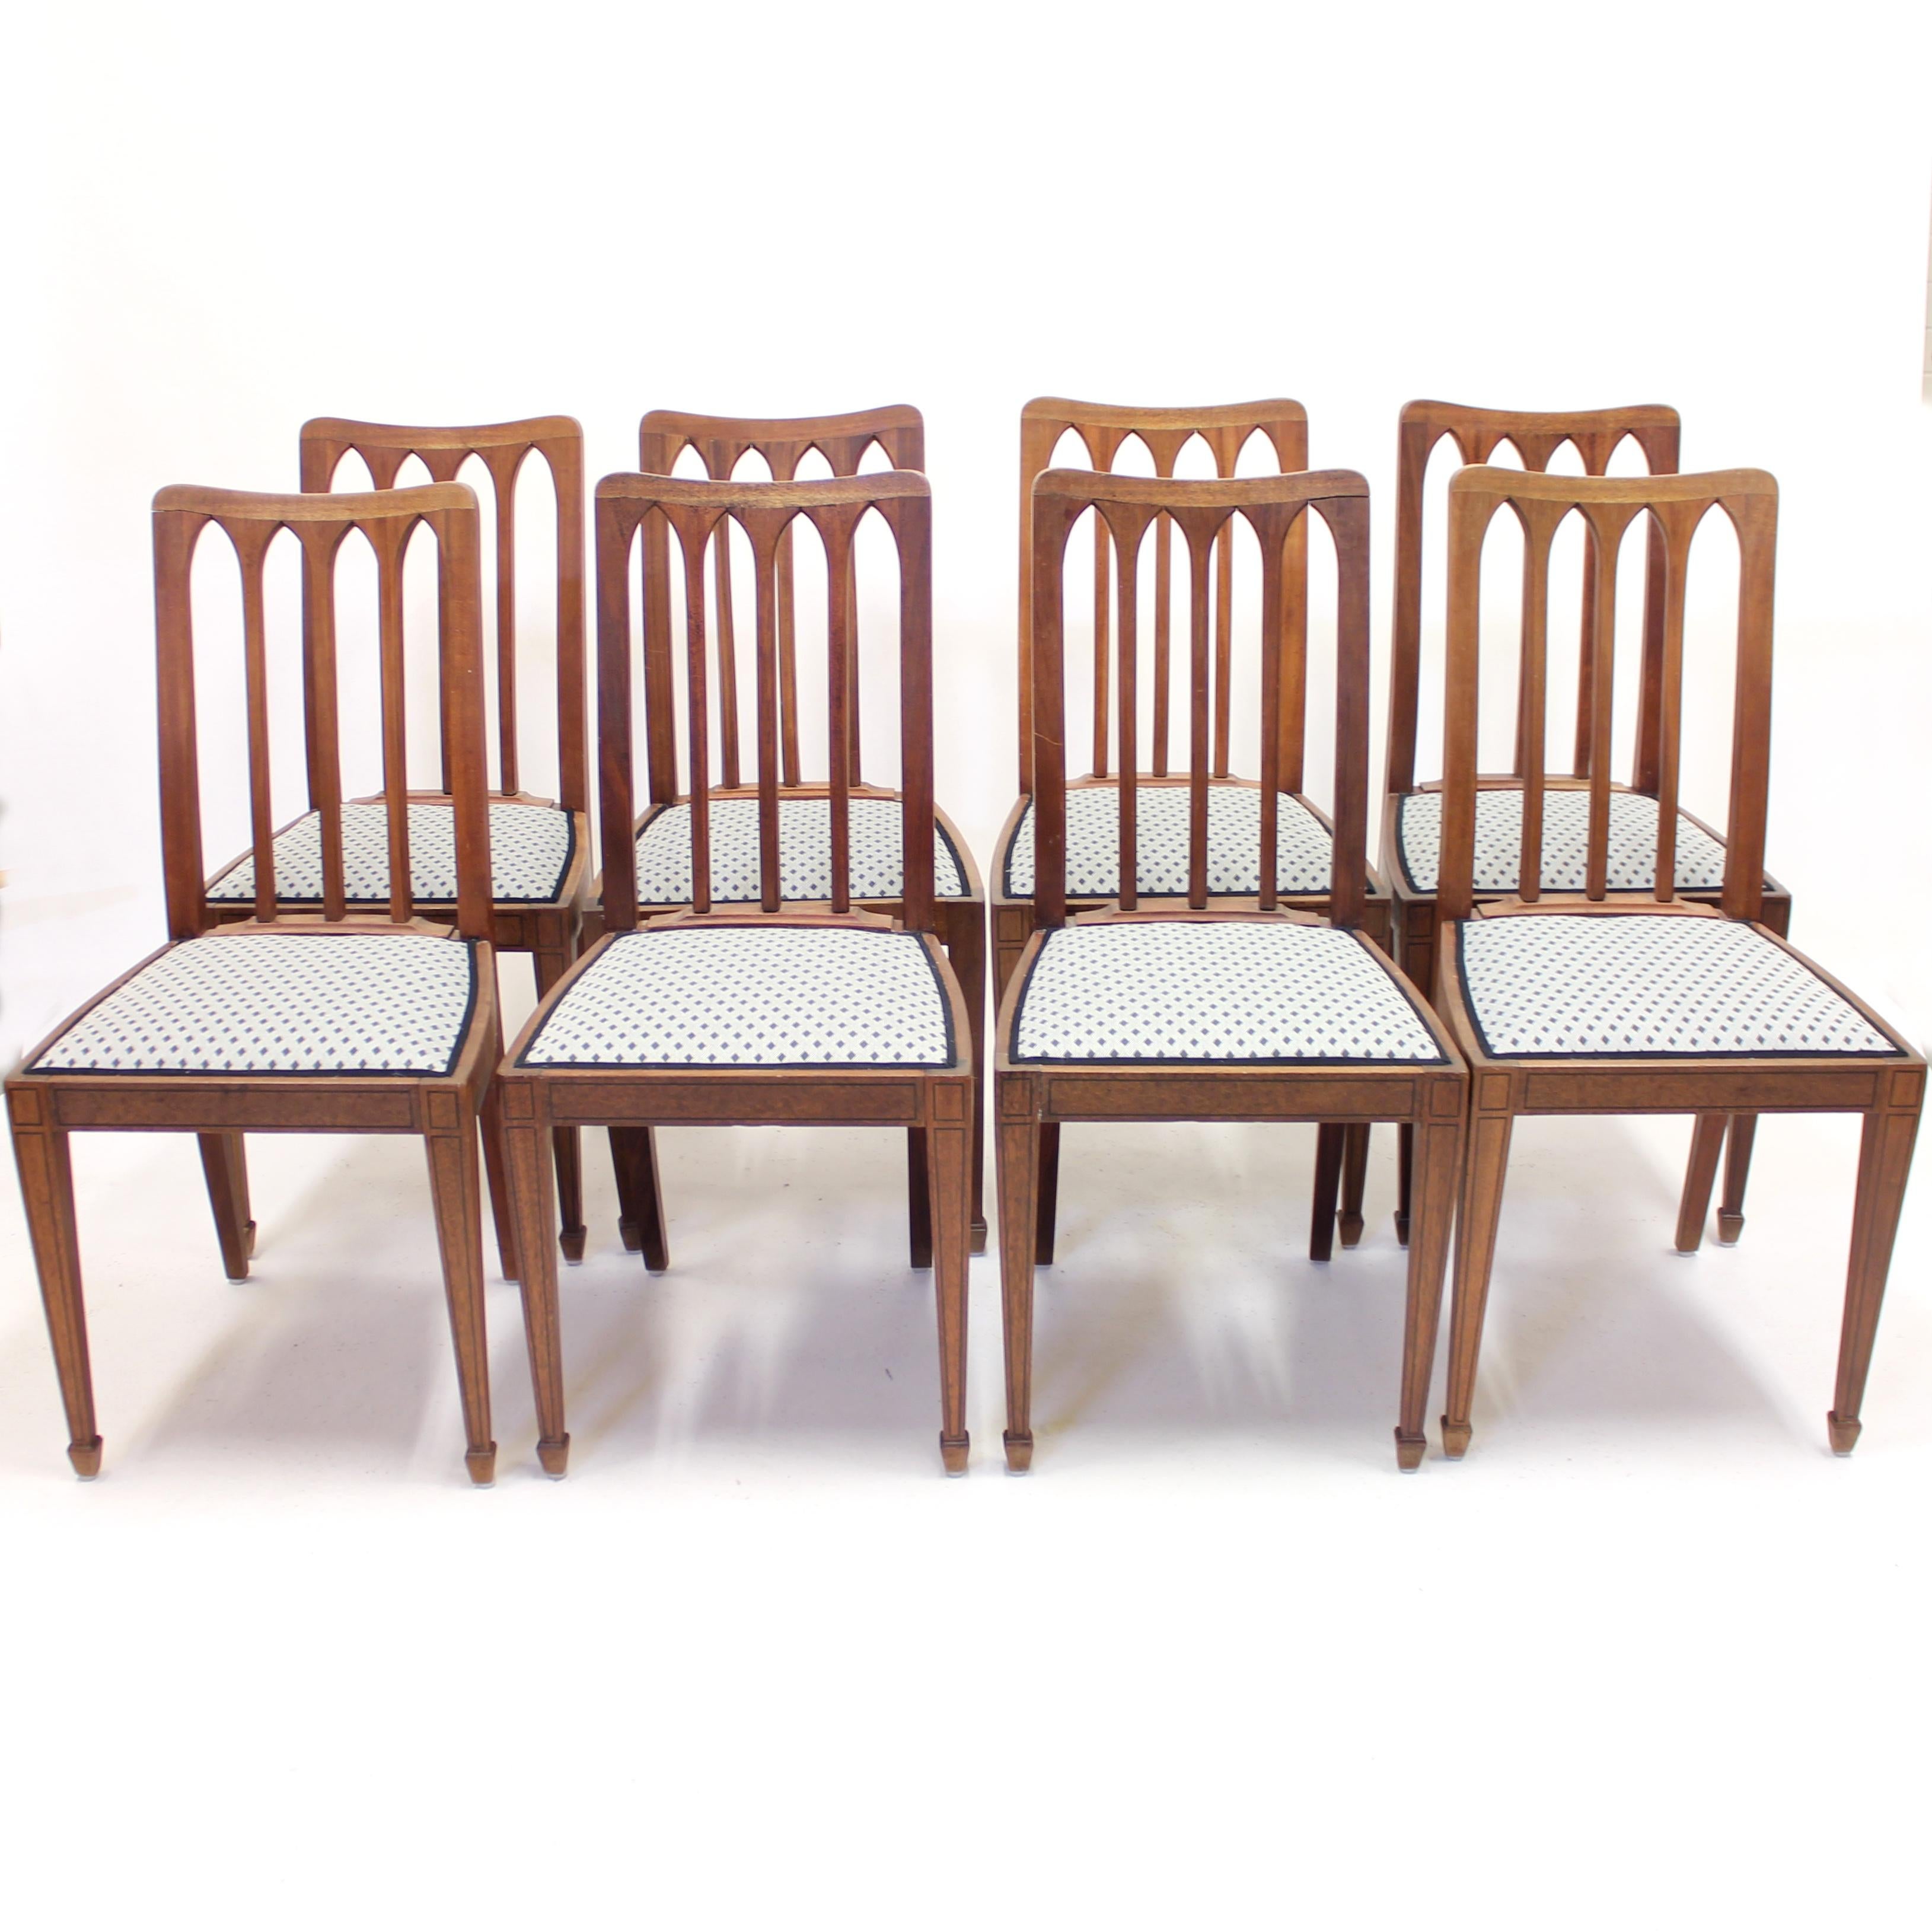 Finnish Set of 8 Oak Architectural Arts & Crafts Chairs, Early 20th Century